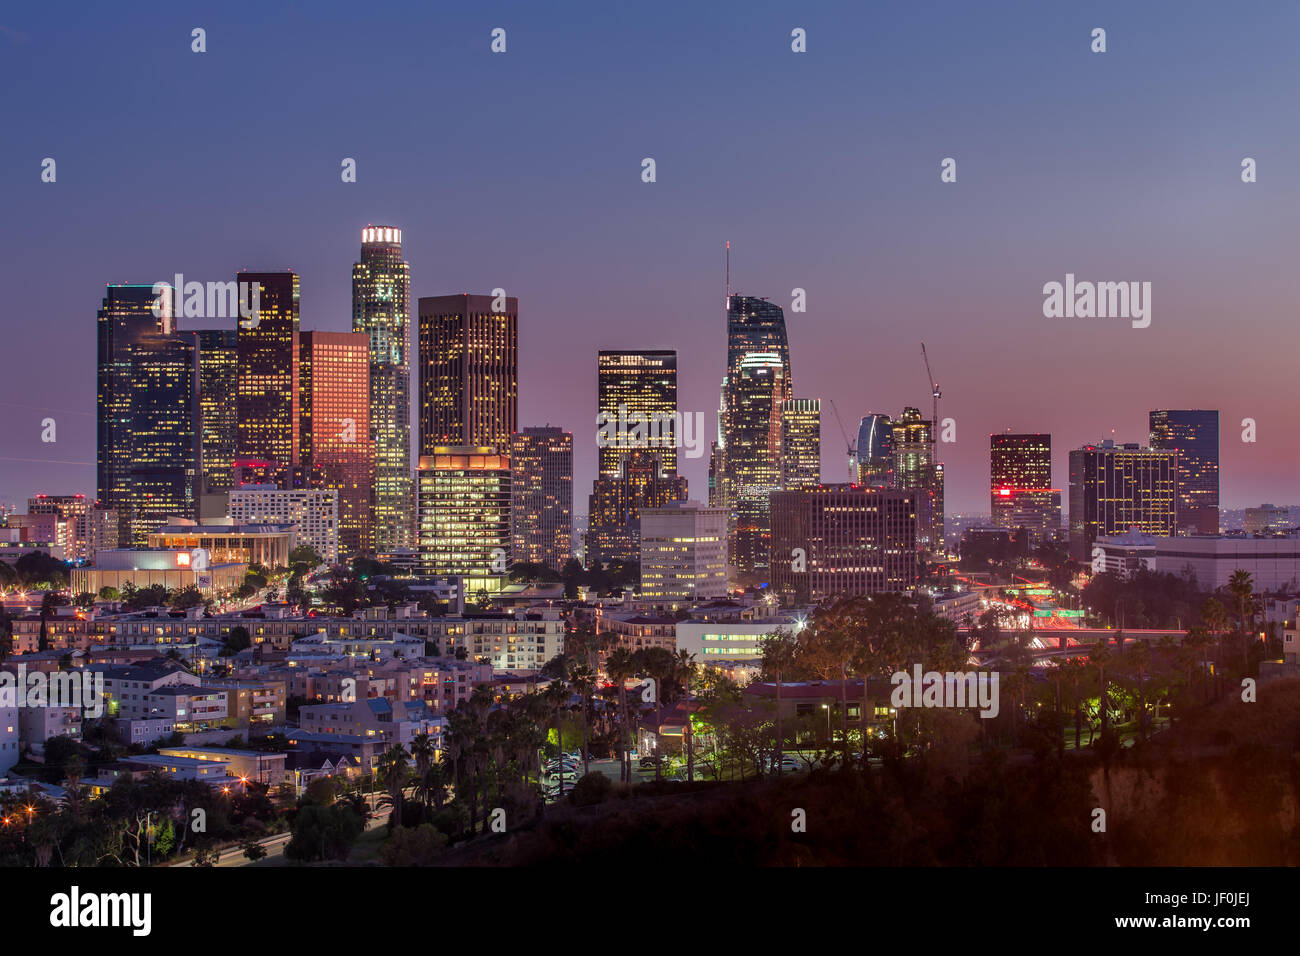 The Skyline of Los Angeles at Dusk Stock Photo